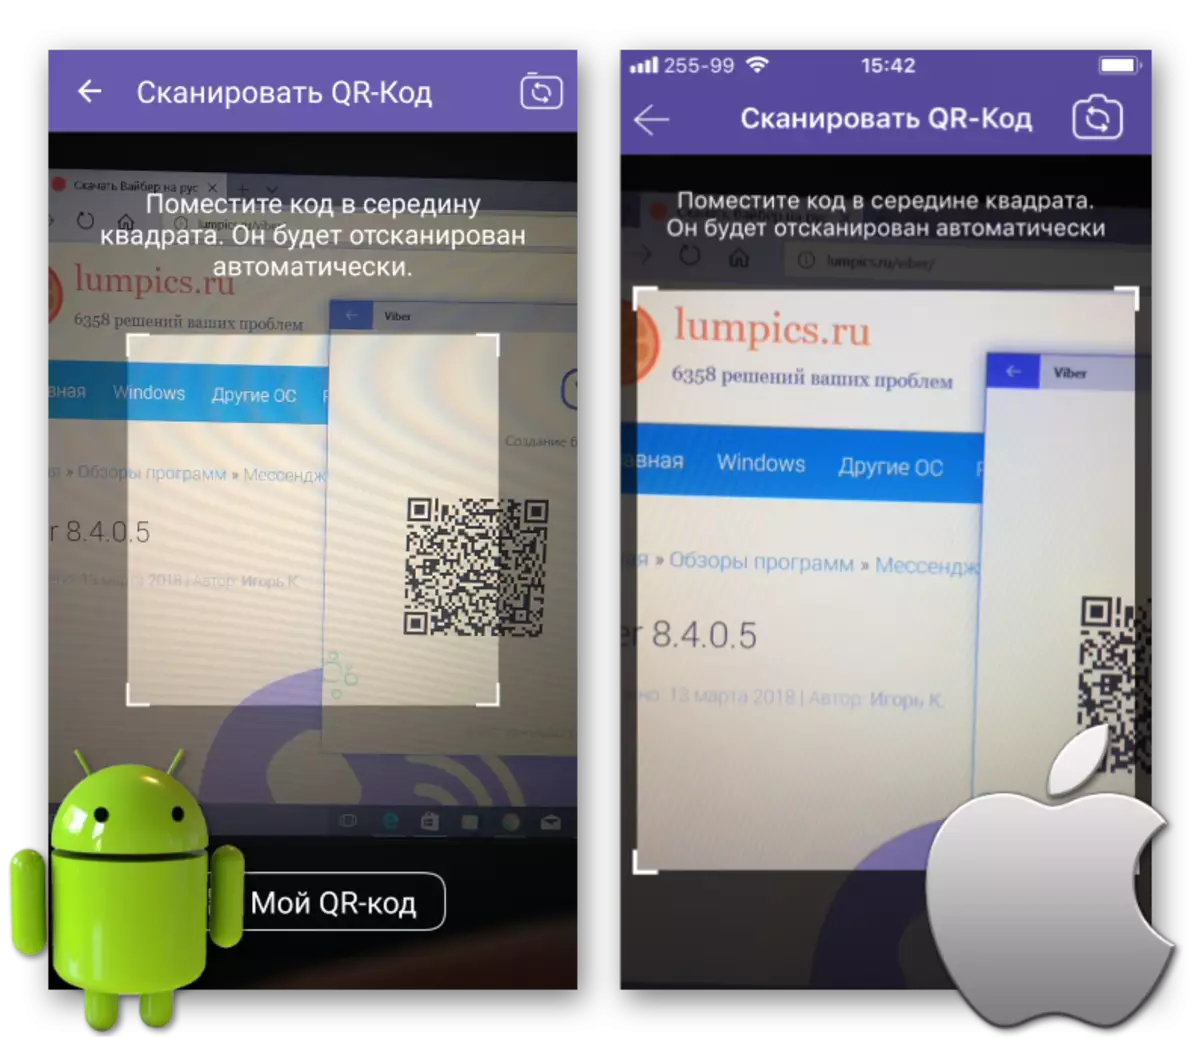 Viber for Windows QR Code Scan za pomocą Smartphone Android lub iPhone'a